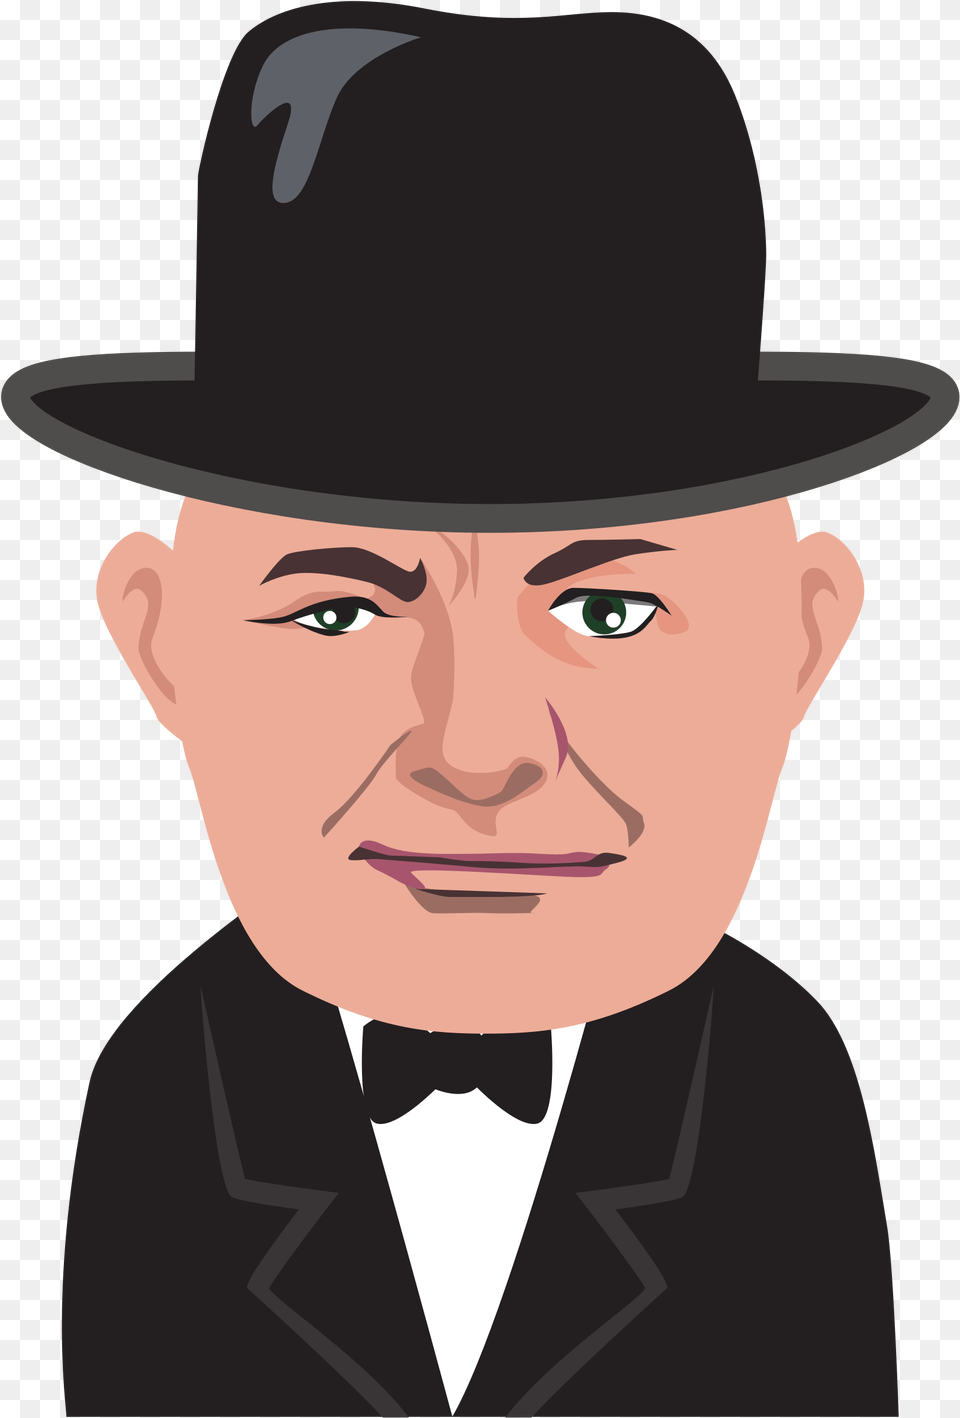 Headfashion Accessoryfedora Cartoon Images Of Winston Churchill, Clothing, Formal Wear, Hat, Suit Png Image